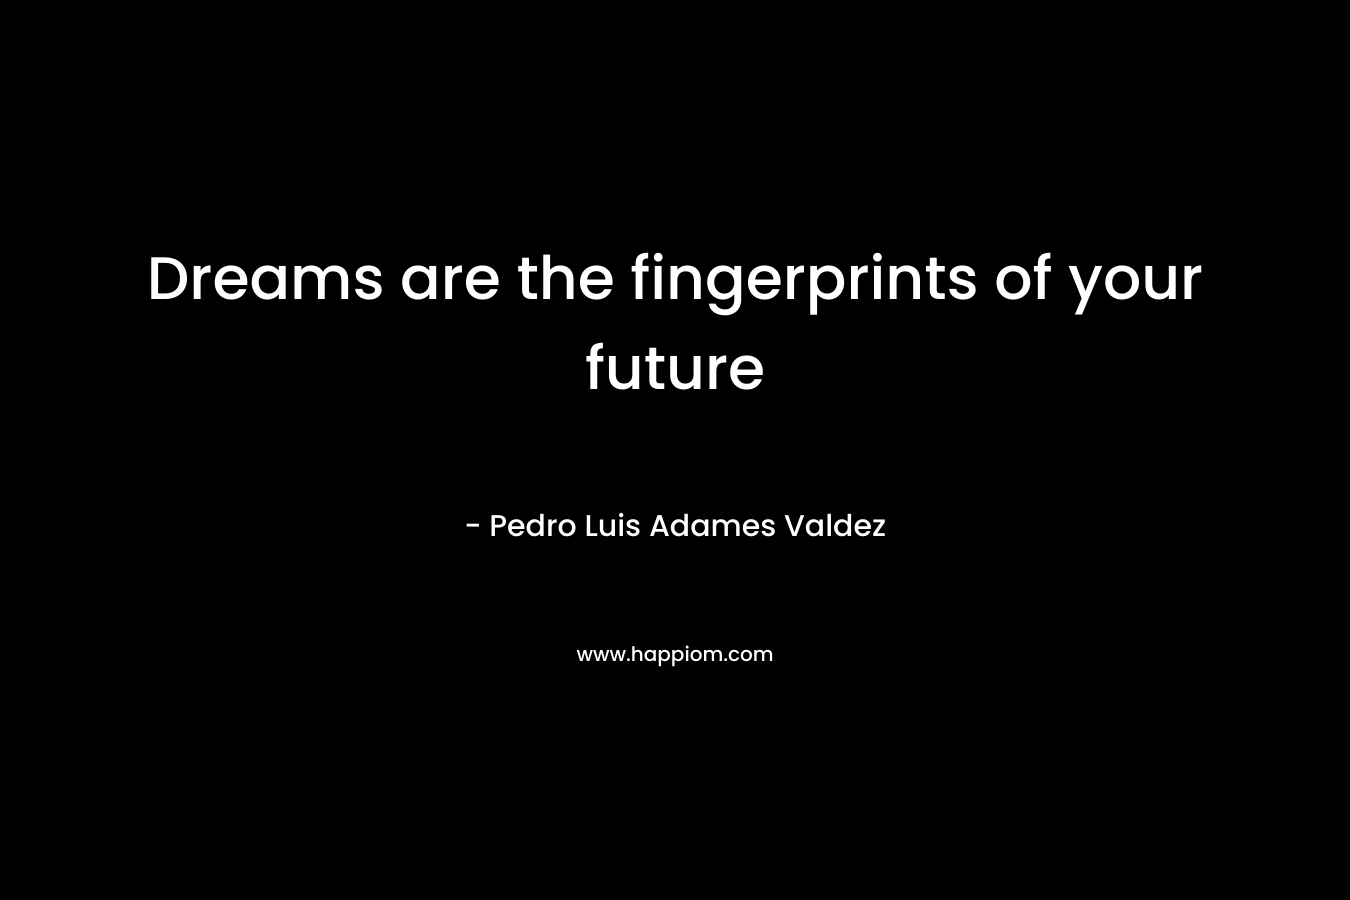 Dreams are the fingerprints of your future